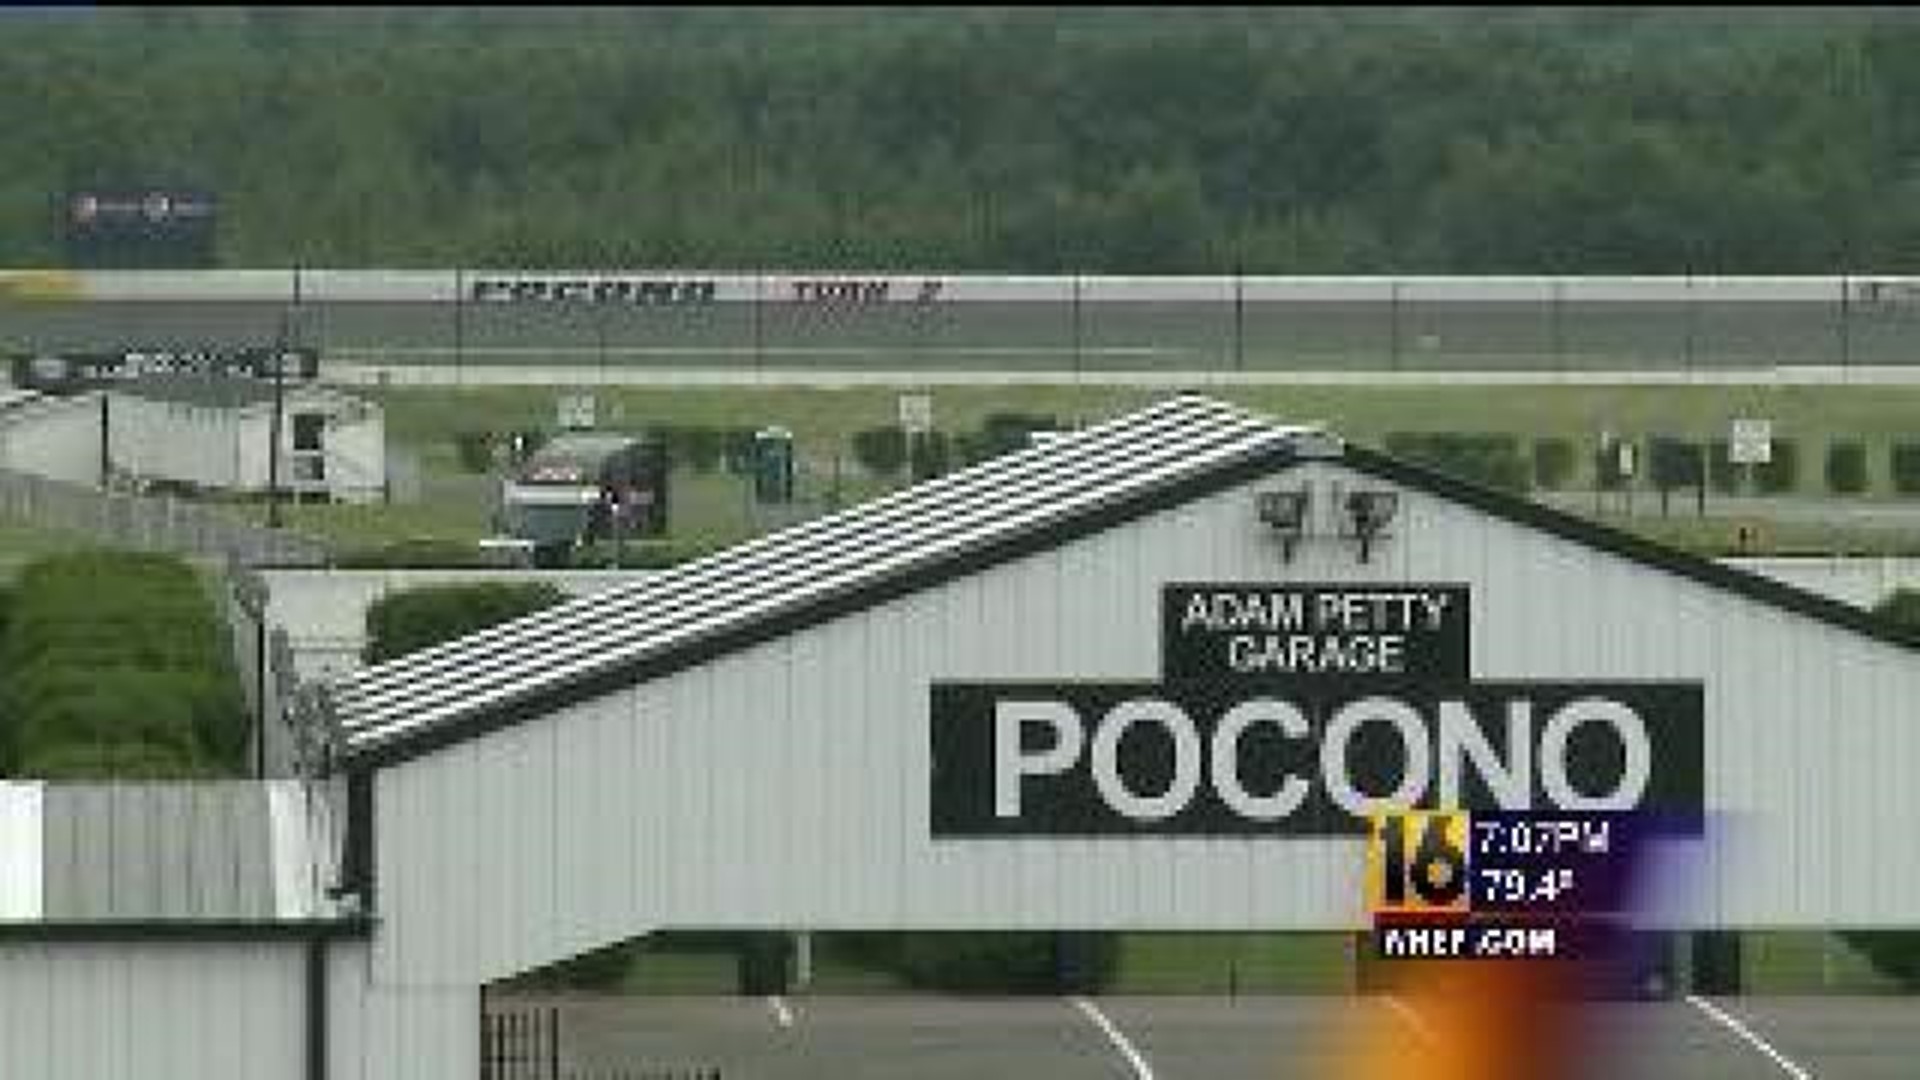 Pocono Raceway Prepping for the Weekend